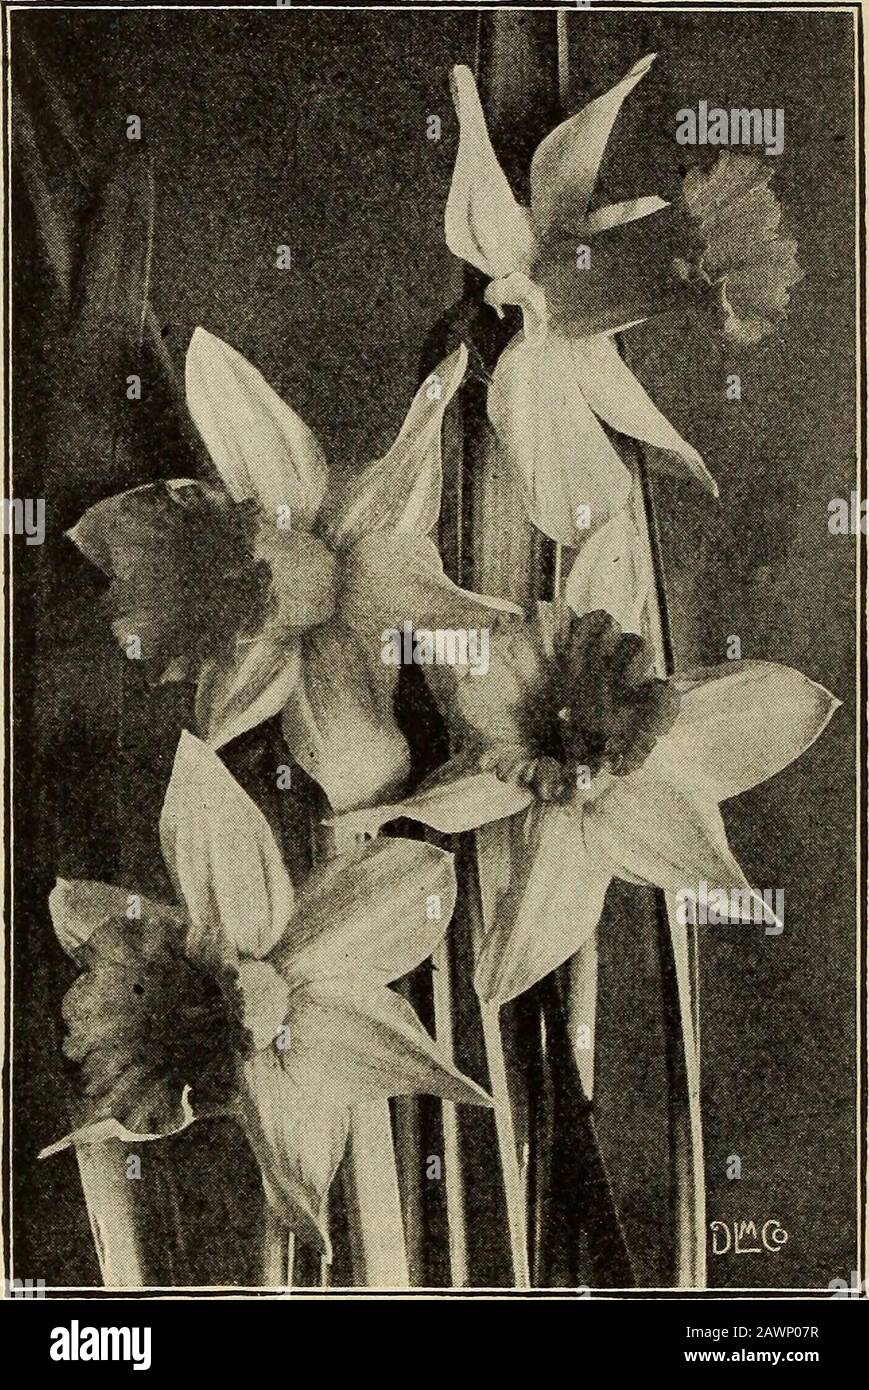 Maule's midsummer and fall guide of seeds, bulbs, plants, etc: 1919 . Narcissus, Double Von Sion Narcissus, Emperor Double-Flowering Narcissus ALBUS PLENUS ODORATUS. Double snow-white,Gardenia-like flowers. The only double variety thatcannot be grown to advantage in pots. Does welloutdoors in any situation, but delights in a shady one. 10 cts. each, 3 for 25 cts., 90 cts. per doz., postpaid. INCOMPARABLE. Often called Butter and Eggs.Colors are orange and yellow, of good size on long,stiff stems, making it an attractive cut flower sort.9 cts. each, 3 for 25 cts., 85 cts. per doz., postpaid. OR Stock Photo